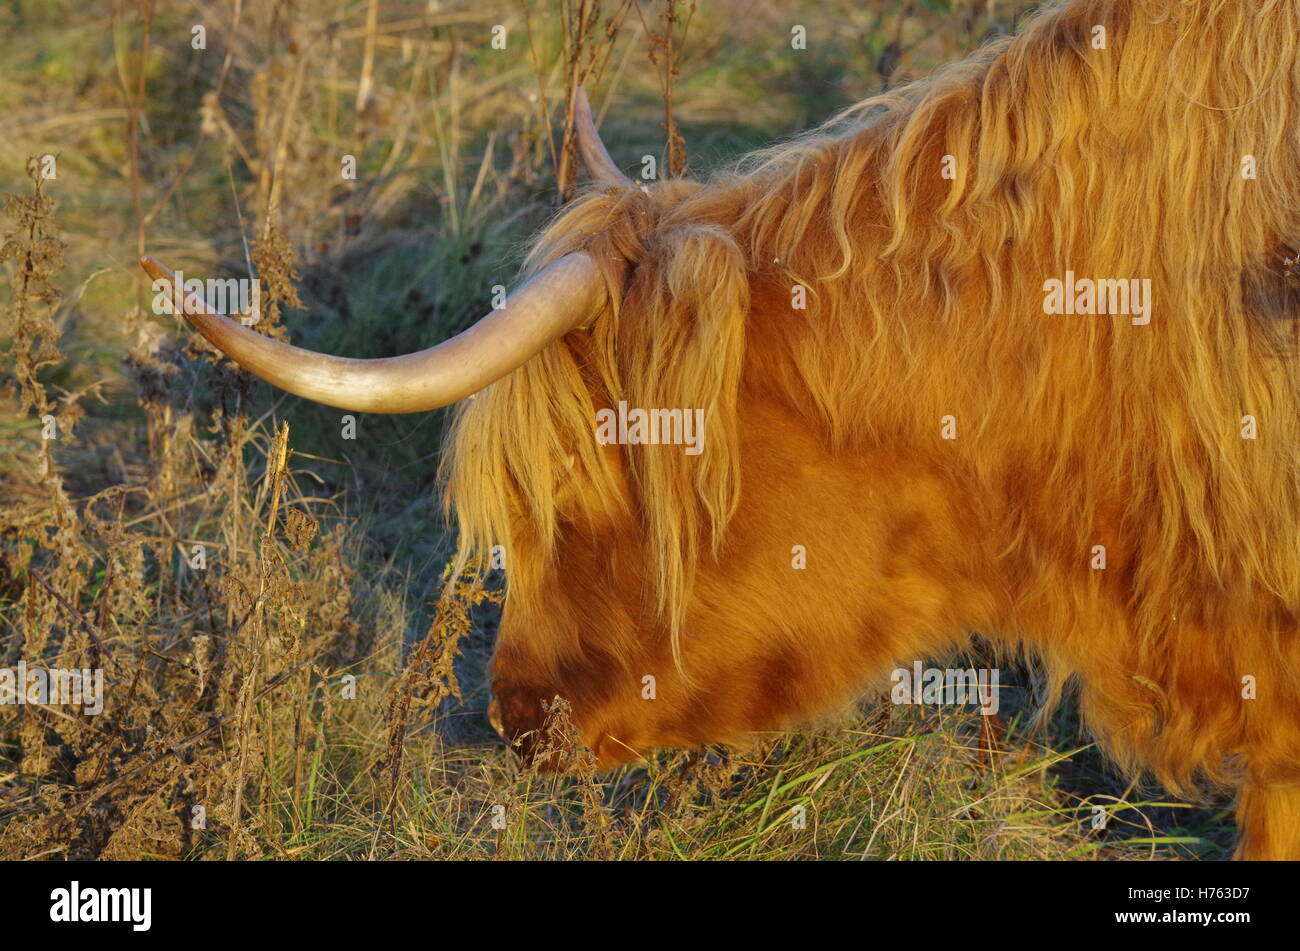 Highland cattle in field meadow Stock Photo